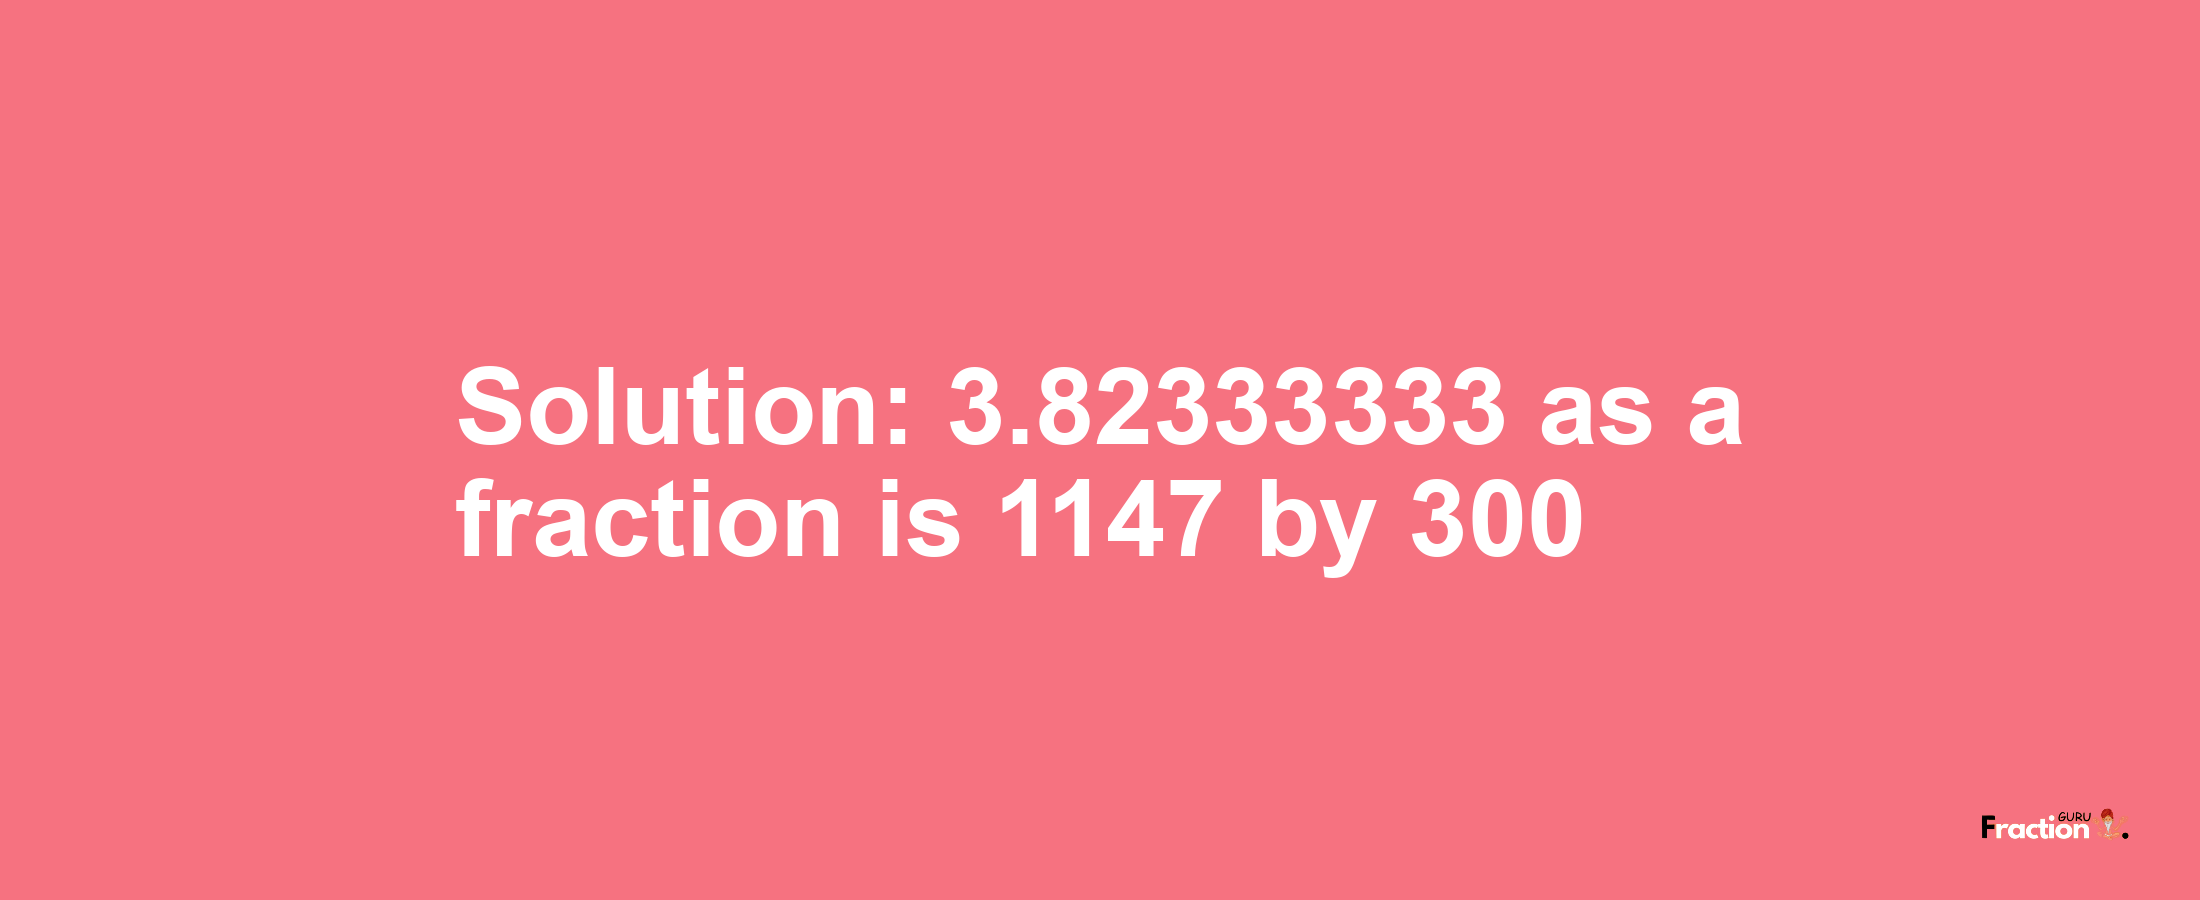 Solution:3.82333333 as a fraction is 1147/300